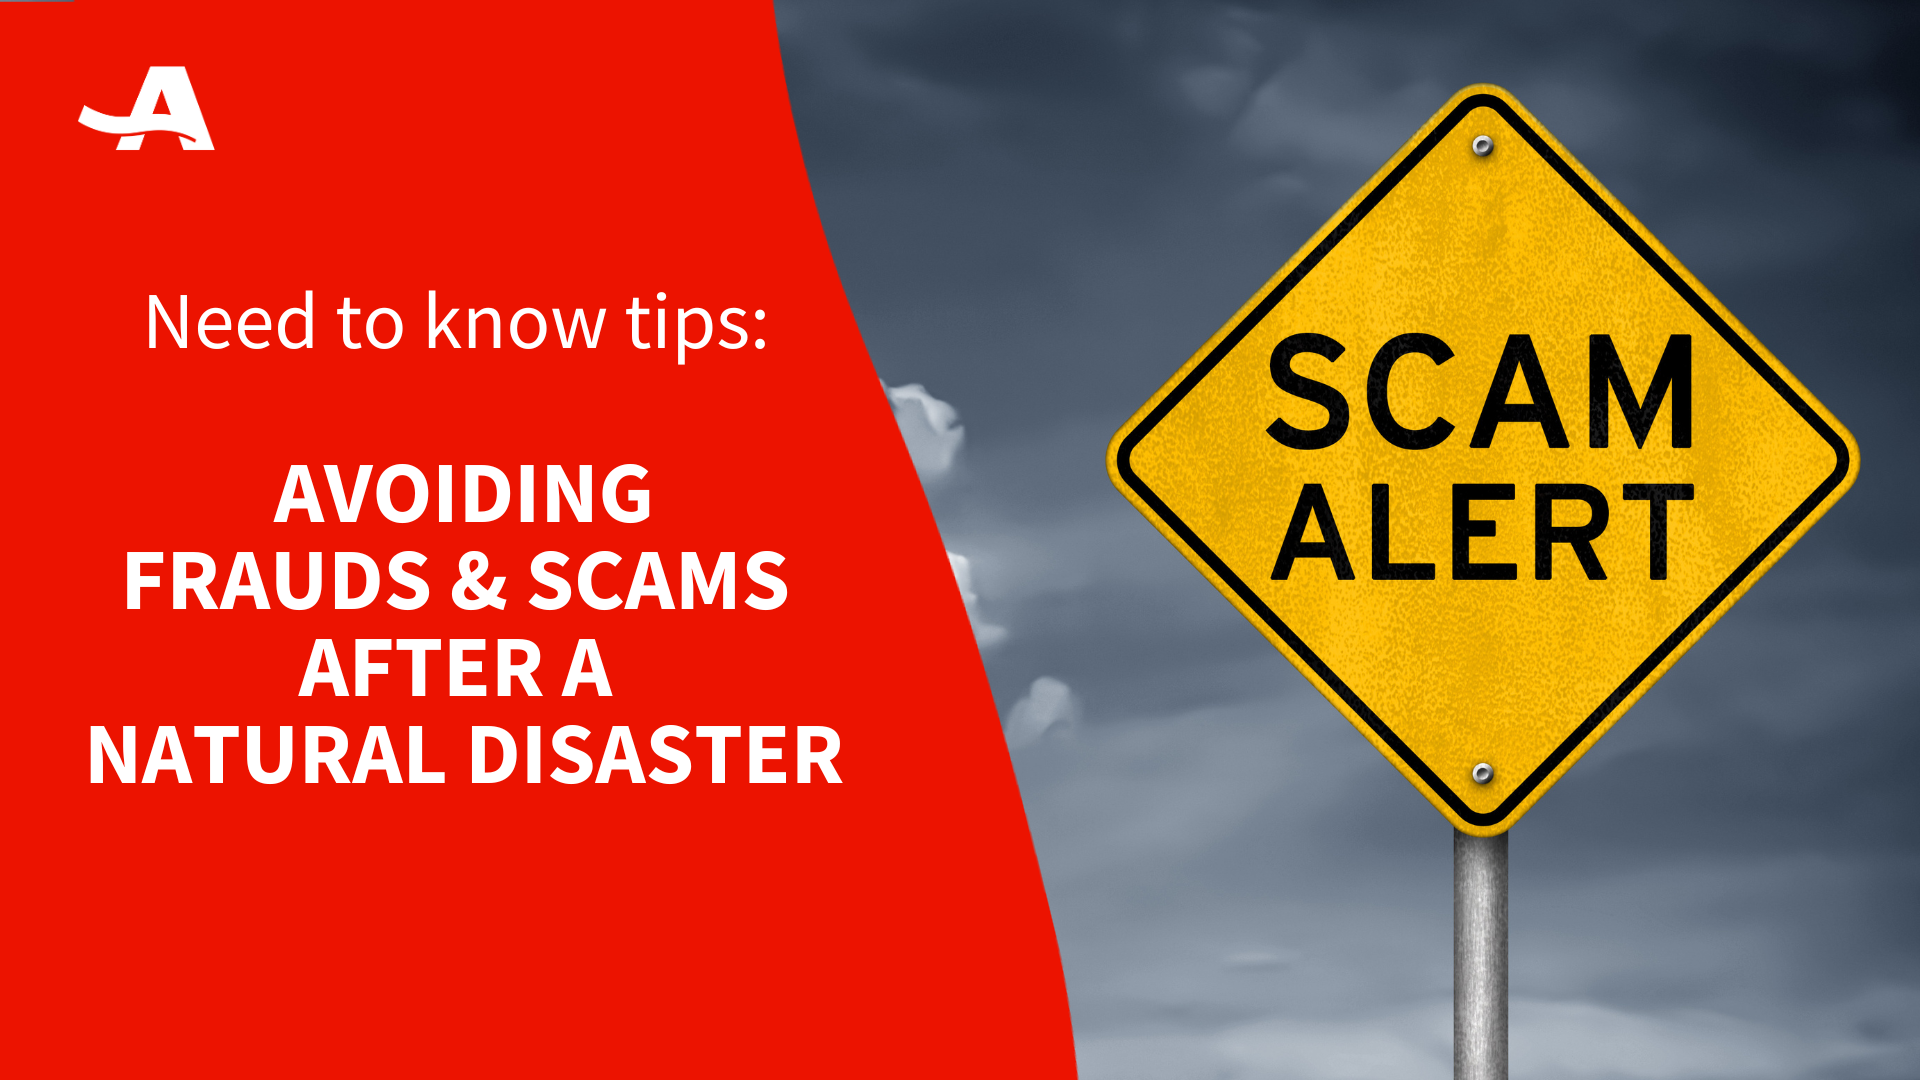 Avoiding Frauds & Scams After a Natural Disaster